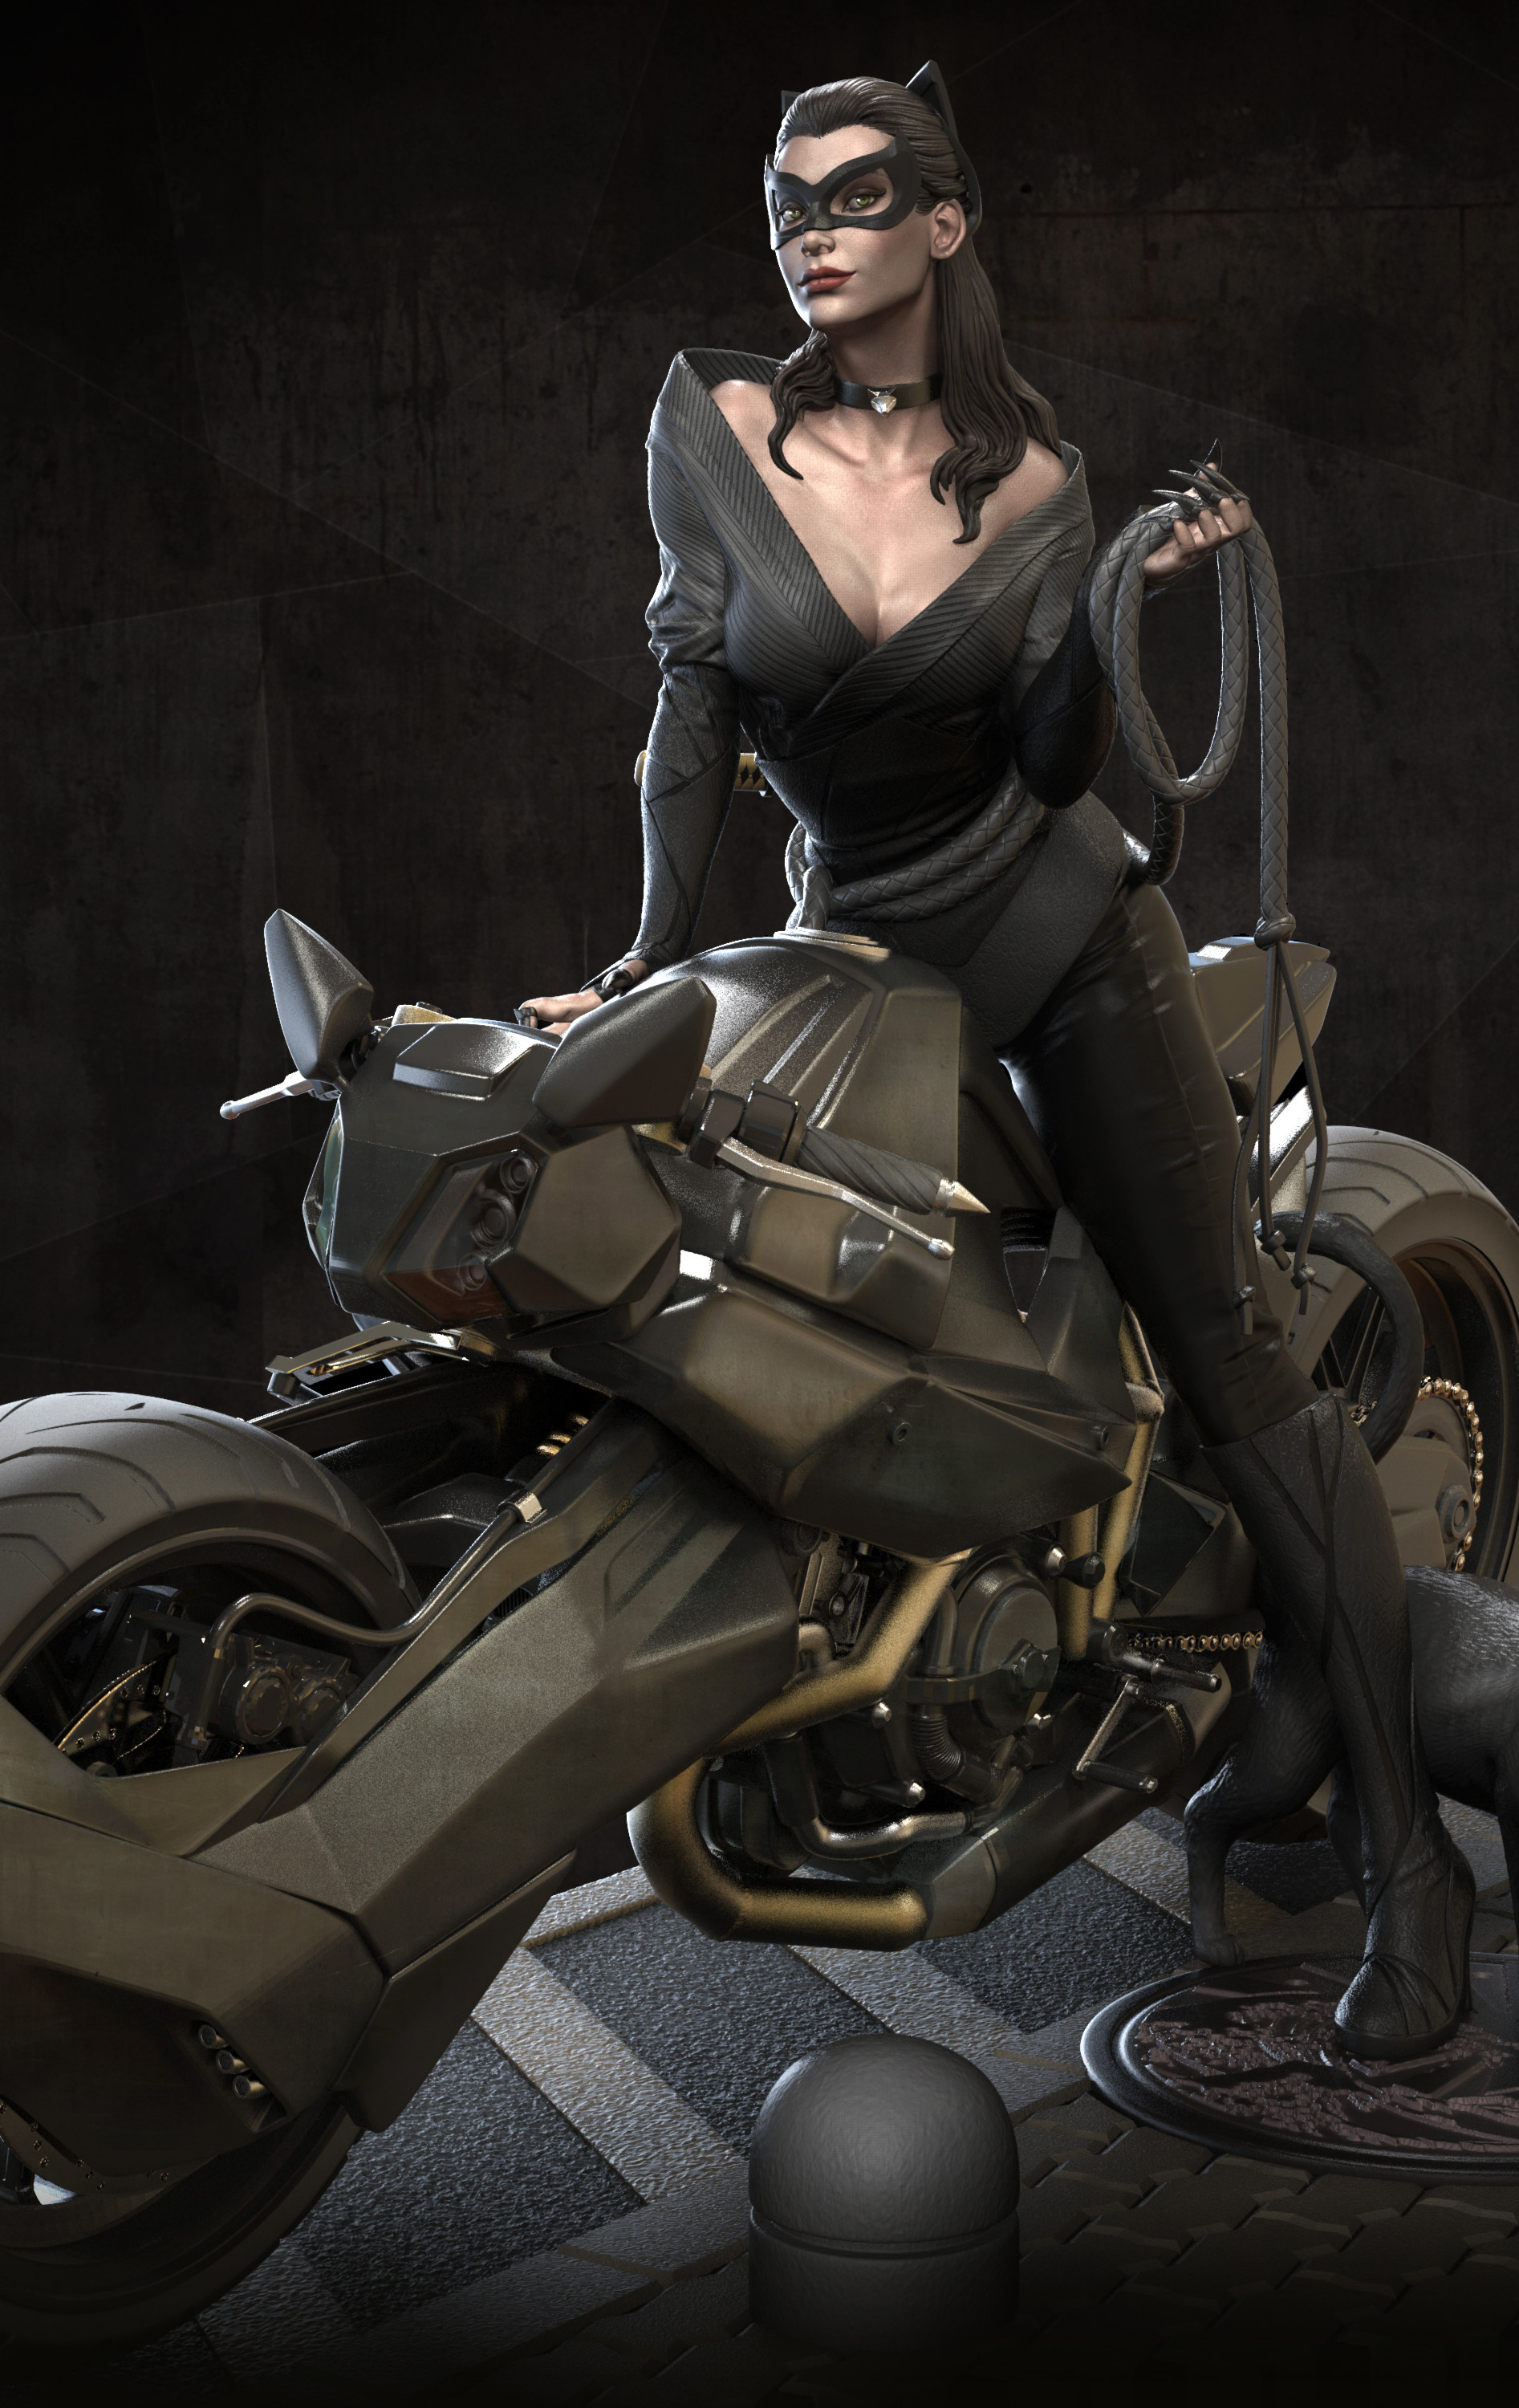 General 1893x3000 Marthin Agusta Batman vehicle motorcycle women with motorcycles mask ArtStation DC Comics Catwoman portrait display digital art collarbone long hair closed mouth lipstick red lipstick cleavage